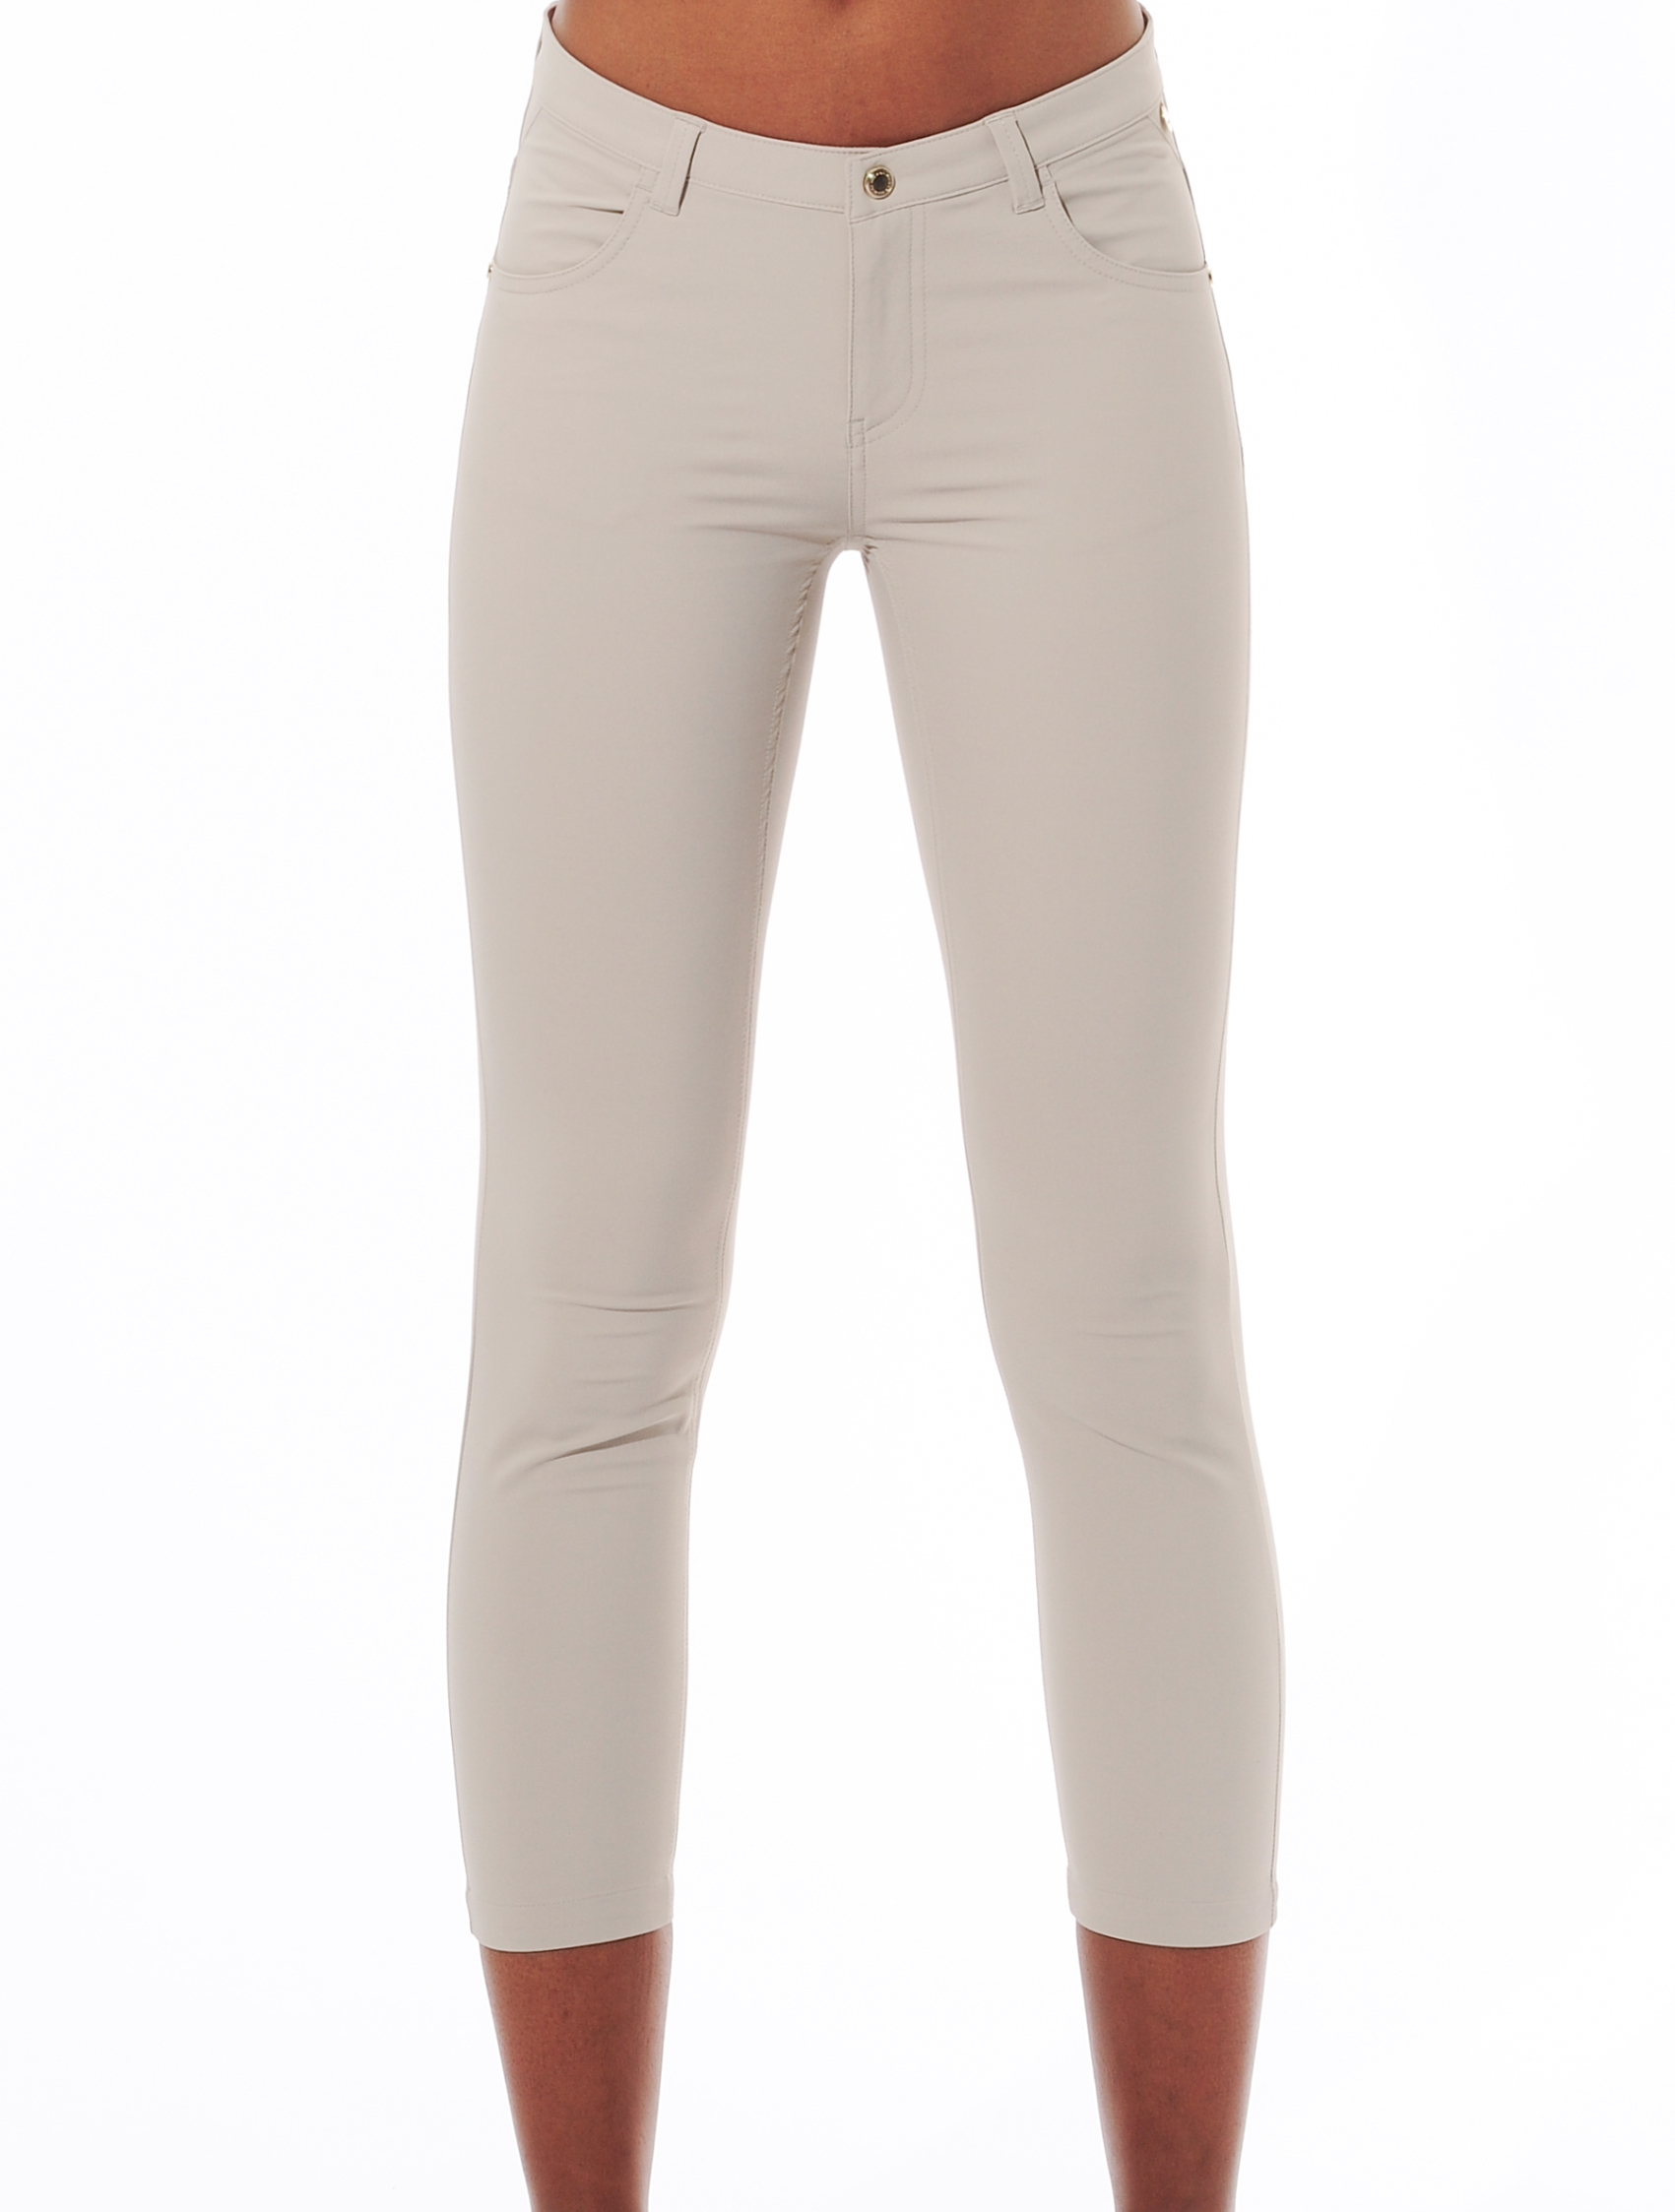 4way stretch cropped 5pockets light taupe 